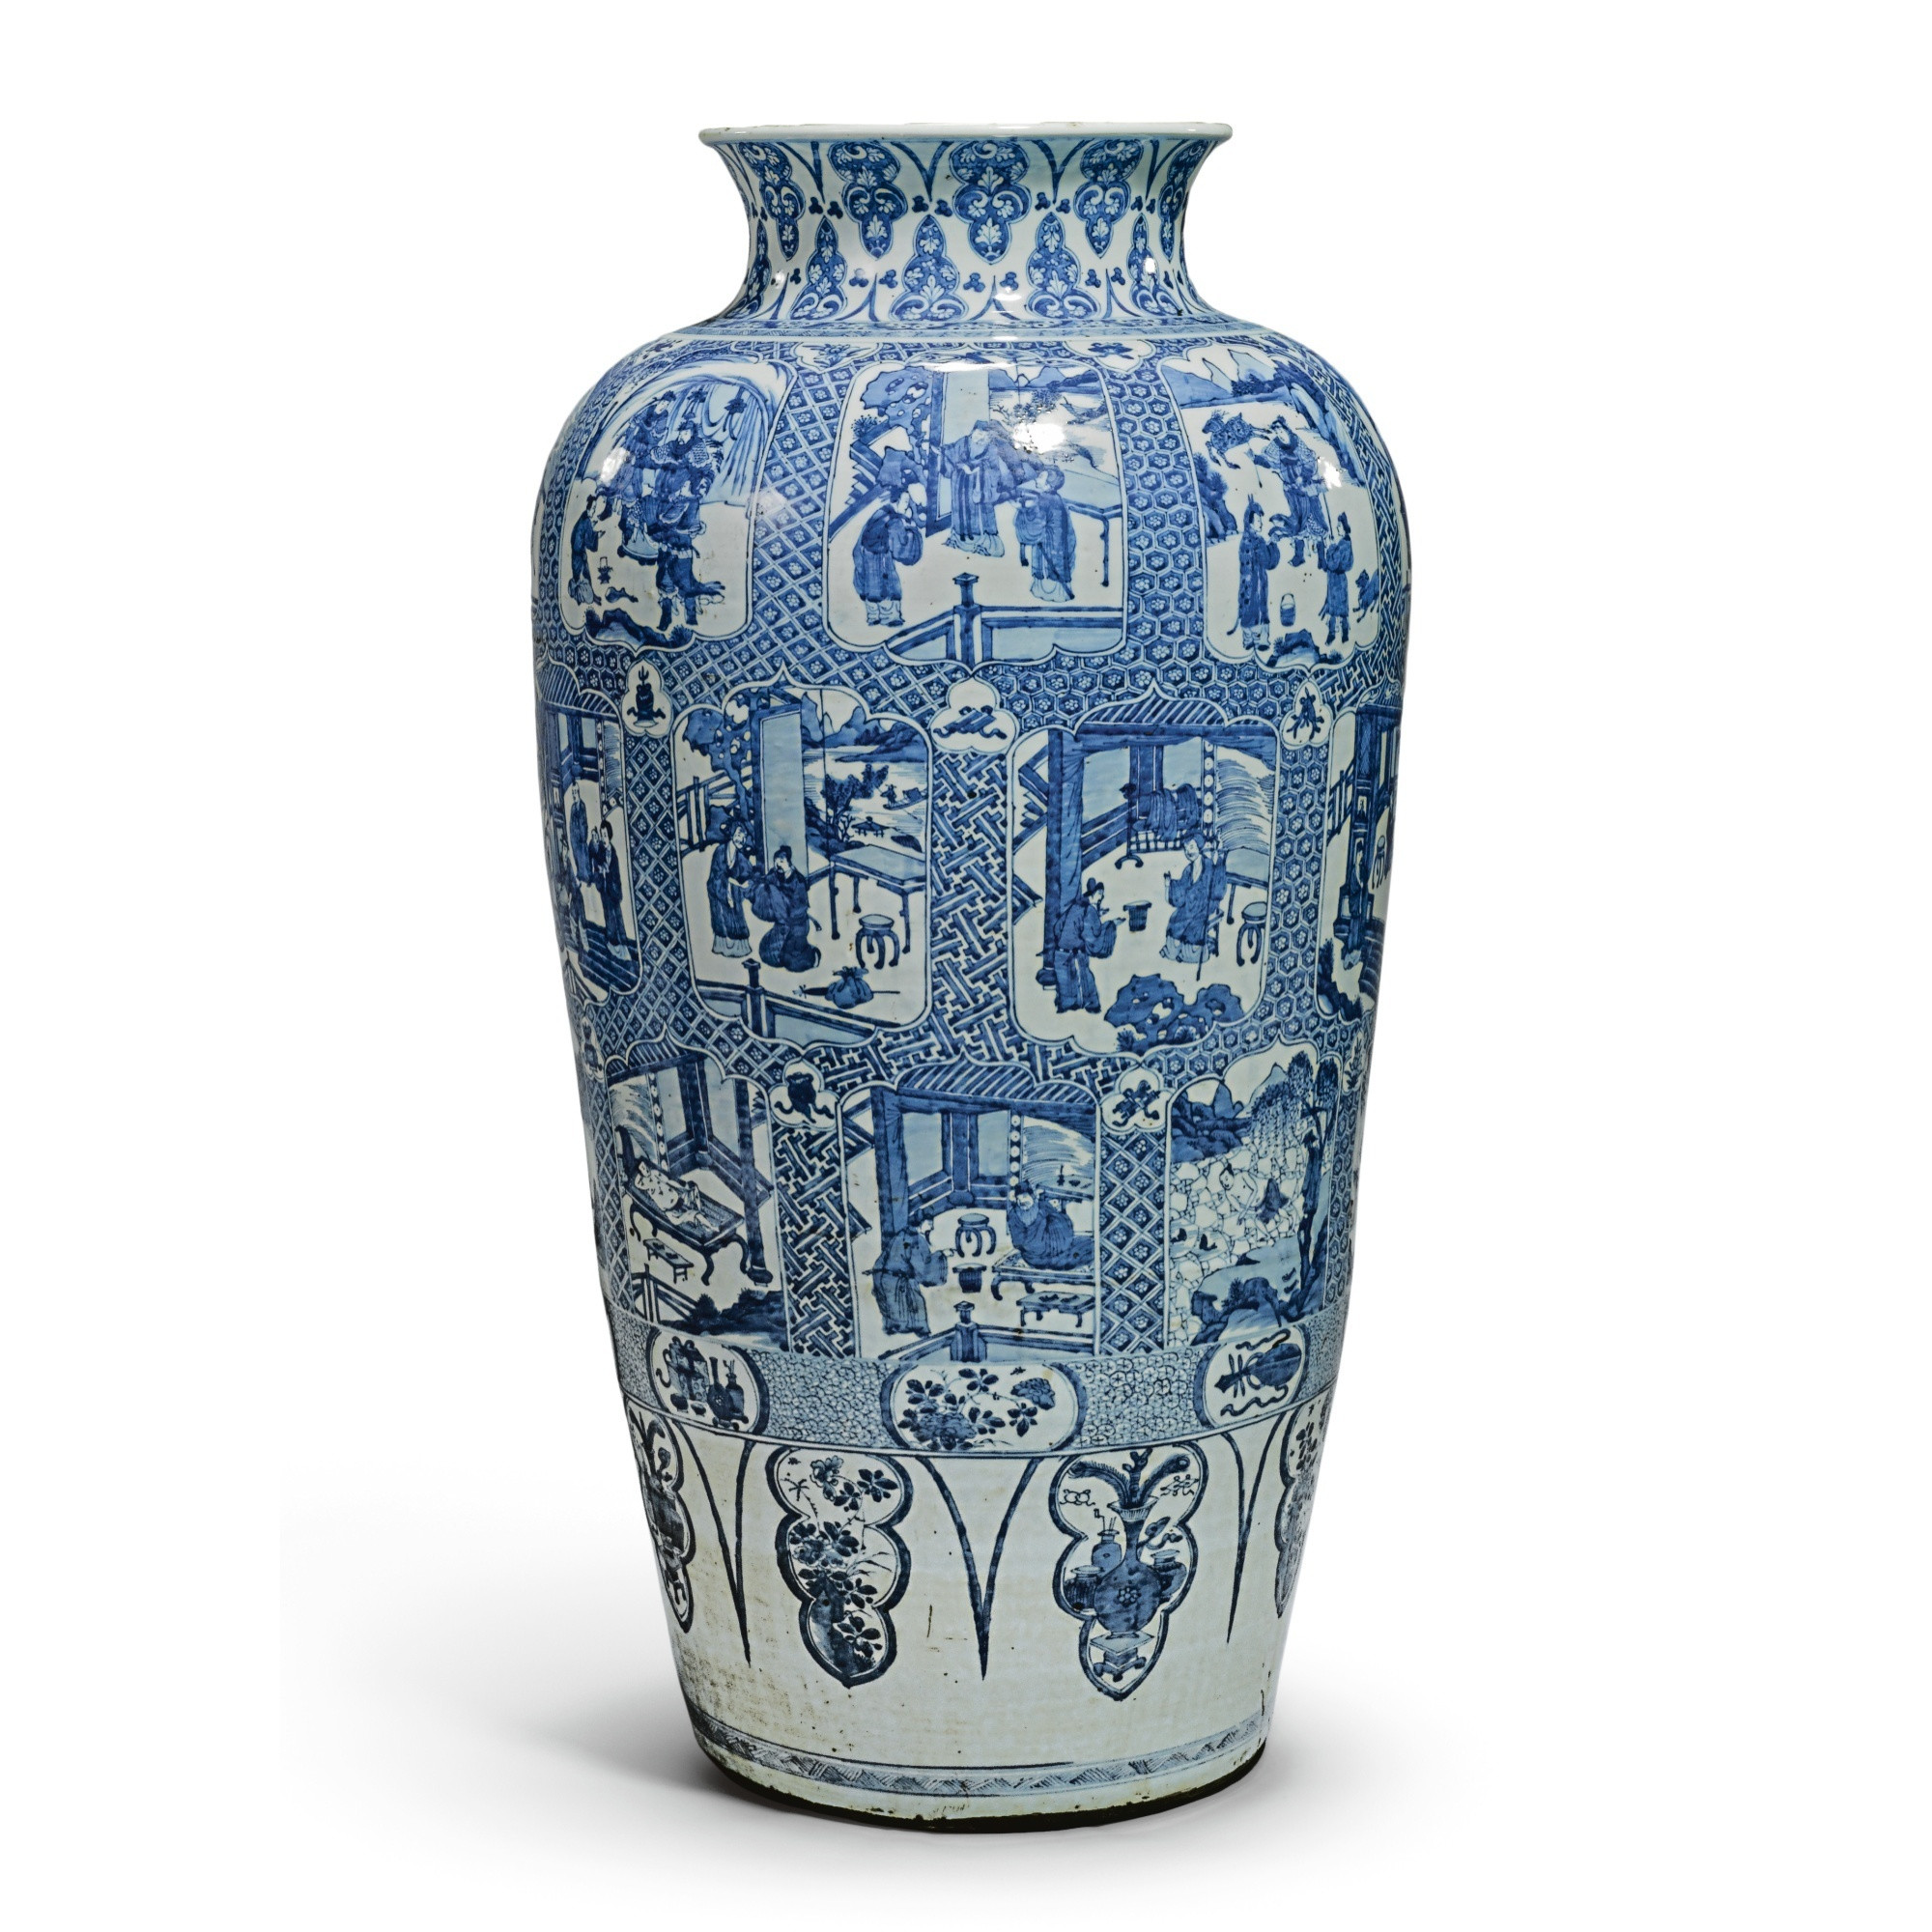 25 Cute Antique Chinese Pottery Vases 2024 free download antique chinese pottery vases of a large chinese kangxi blue and white soldier vase painted with in a large chinese kangxi blue and white soldier vase painted with the twenty